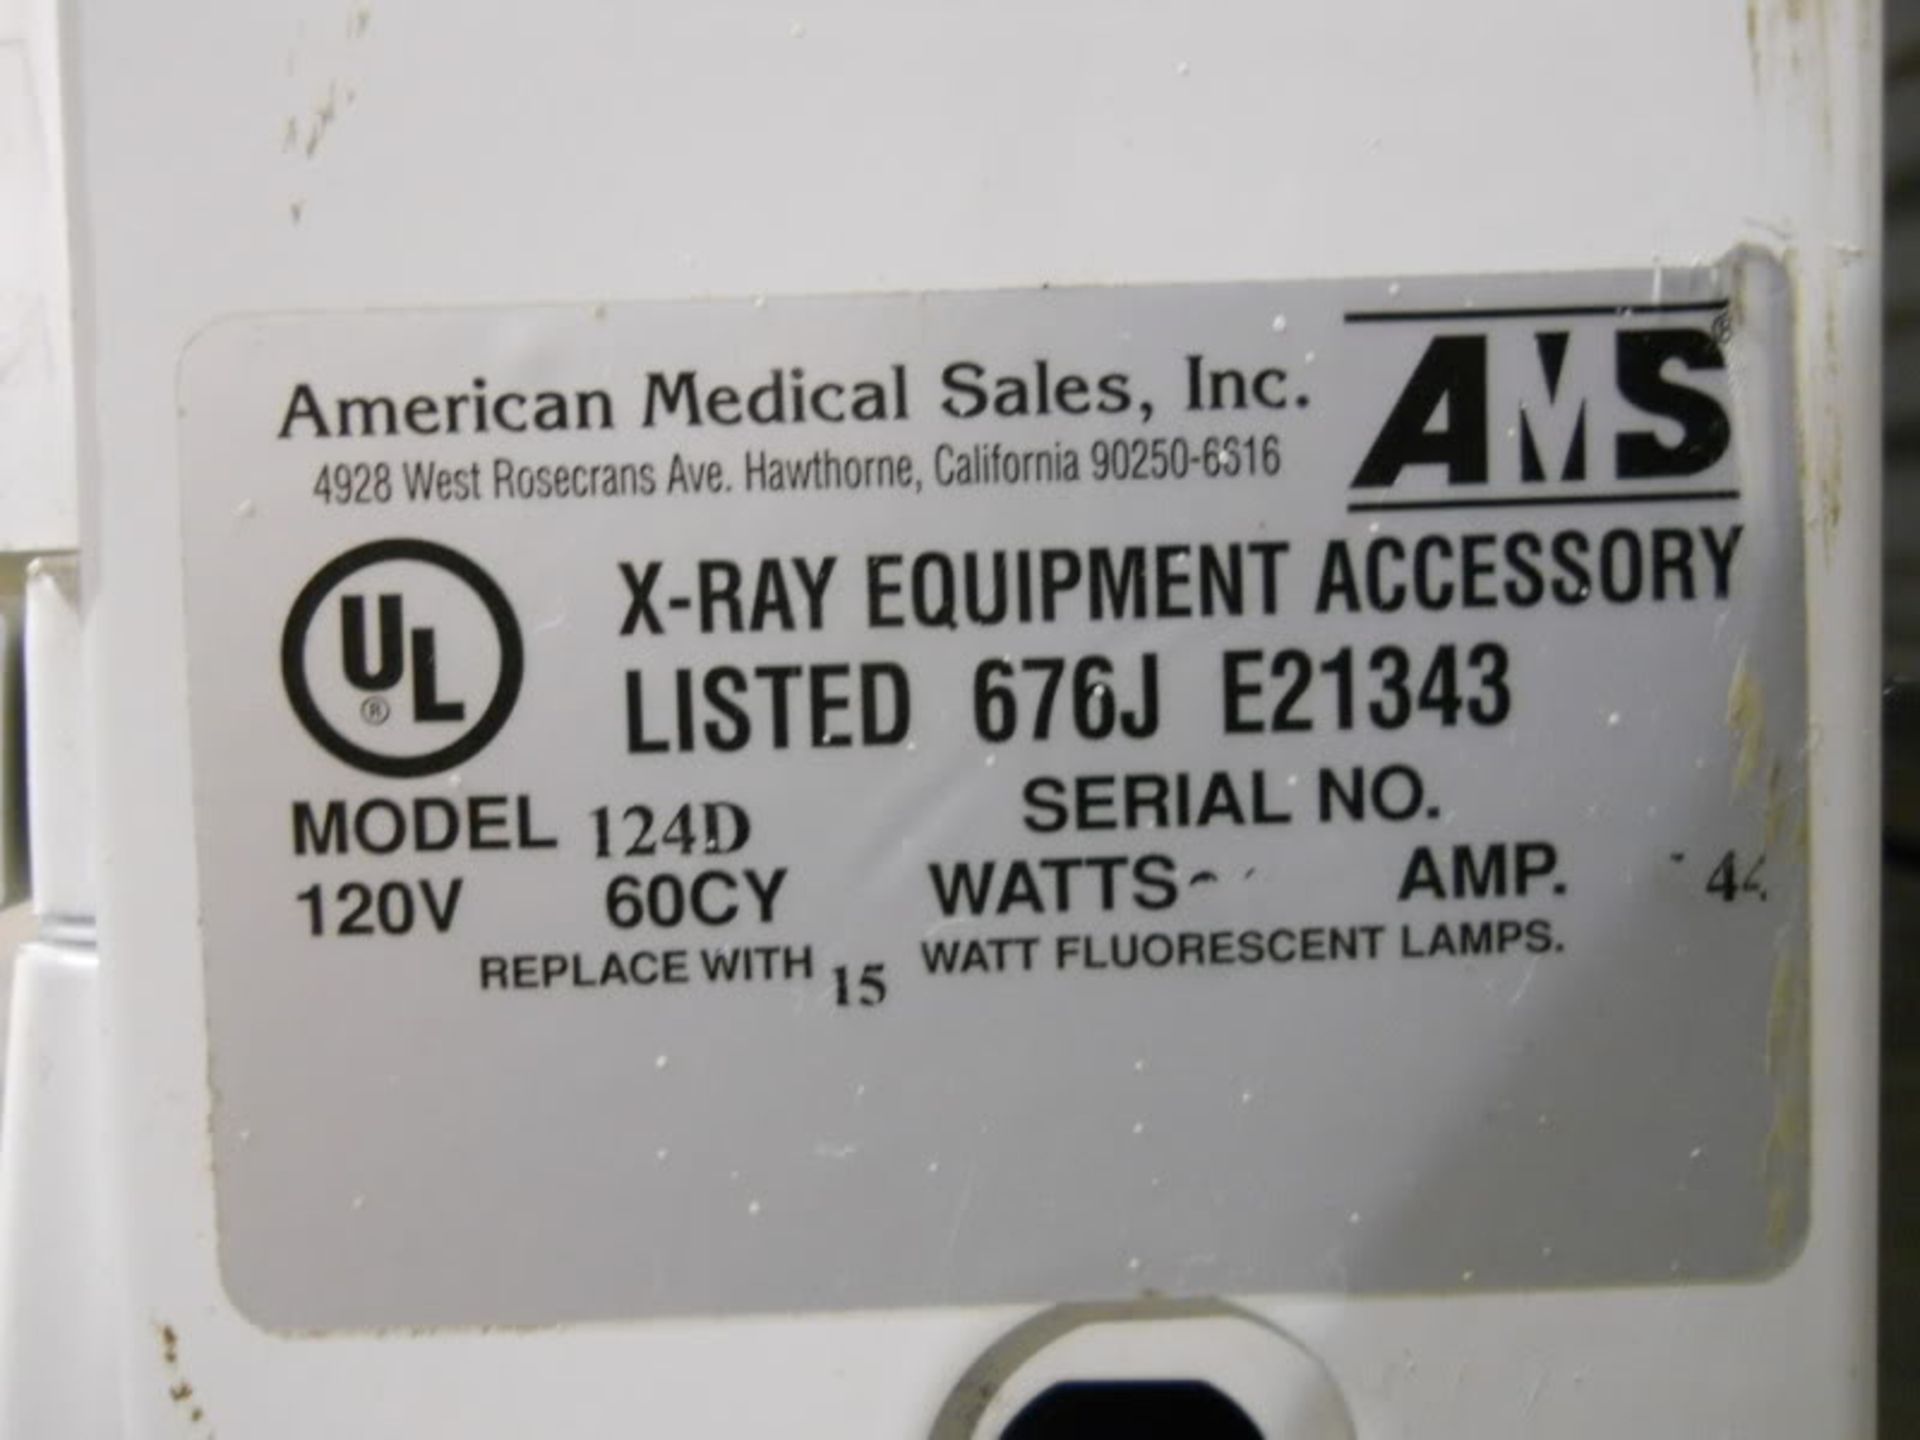 American Medical Sales (AMS) X-Ray Viewer Model 124D (XRay Viewing), Qty 1, 321064224606 - Image 5 of 7